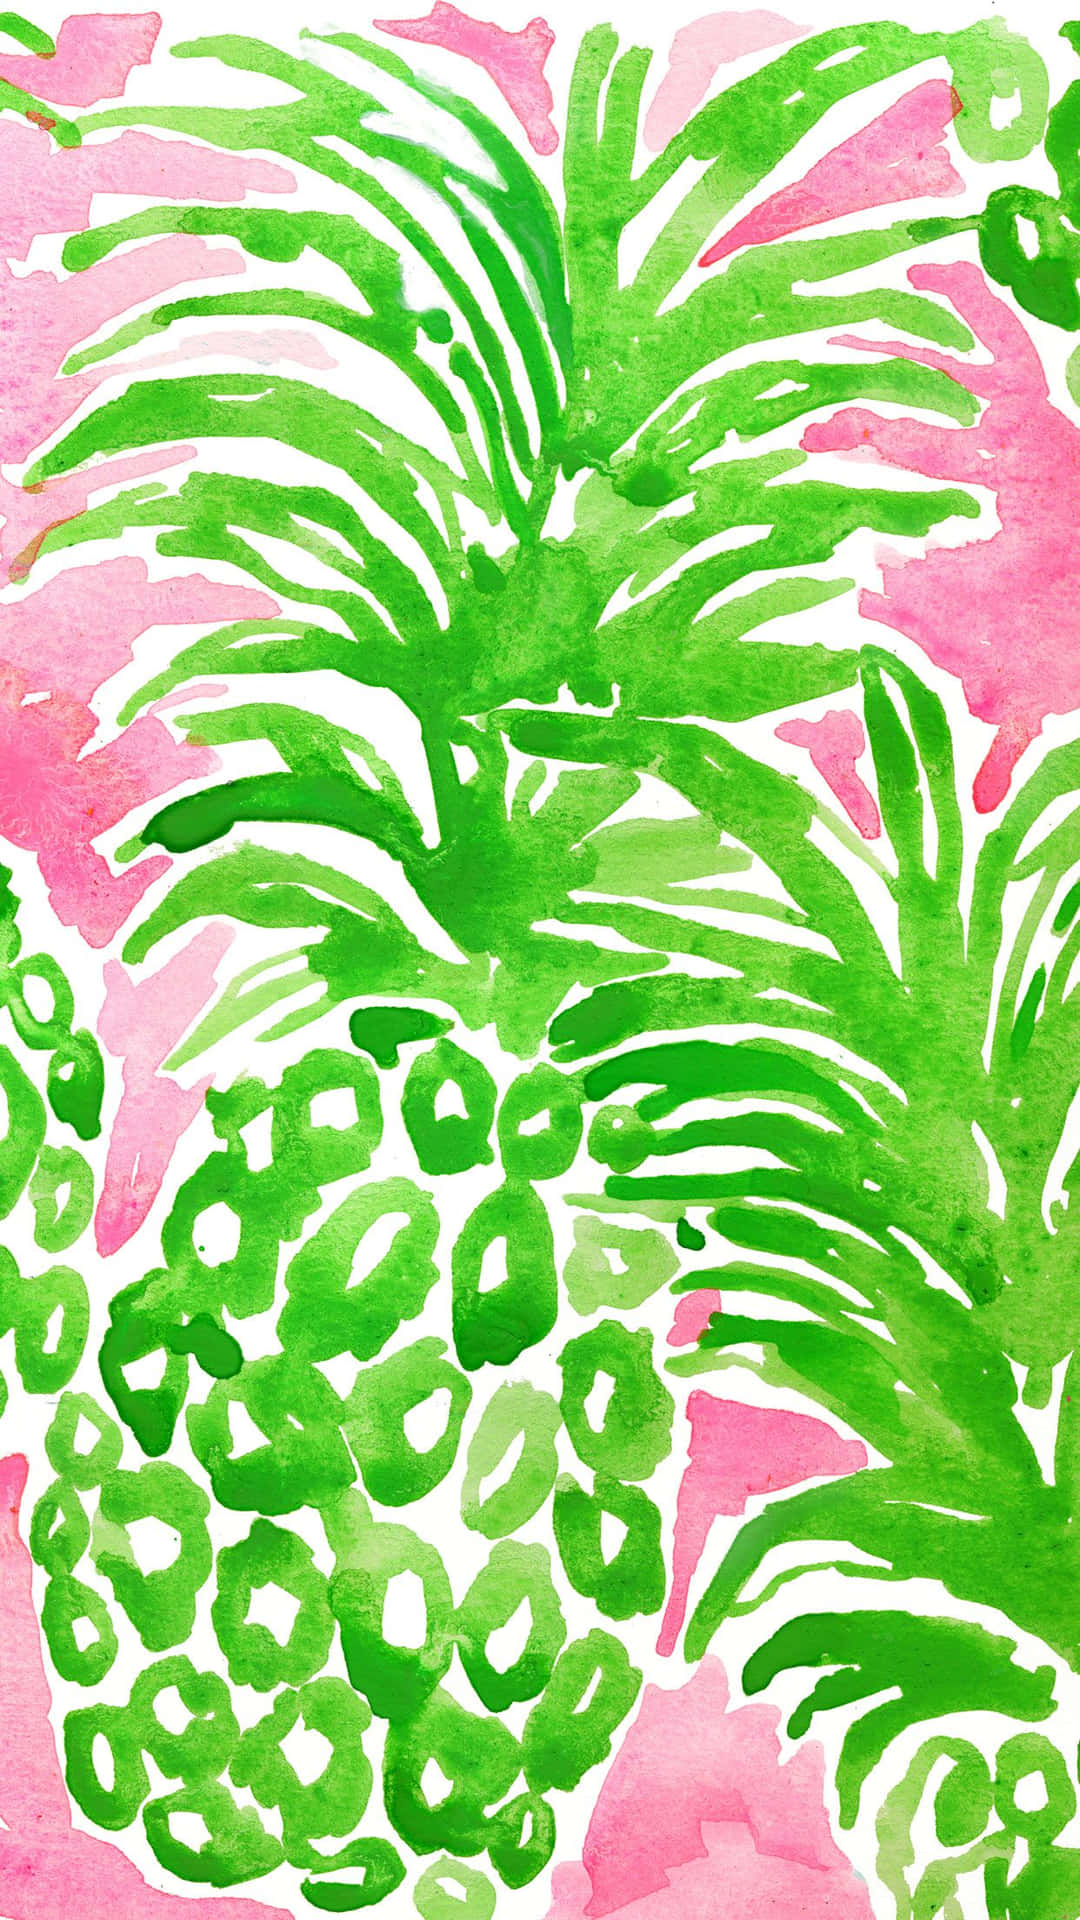 Lilly Pulitzer Wallpaper  iXpap  Lilly pulitzer iphone wallpaper Lily  pulitzer wallpaper Lilly pulitzer prints